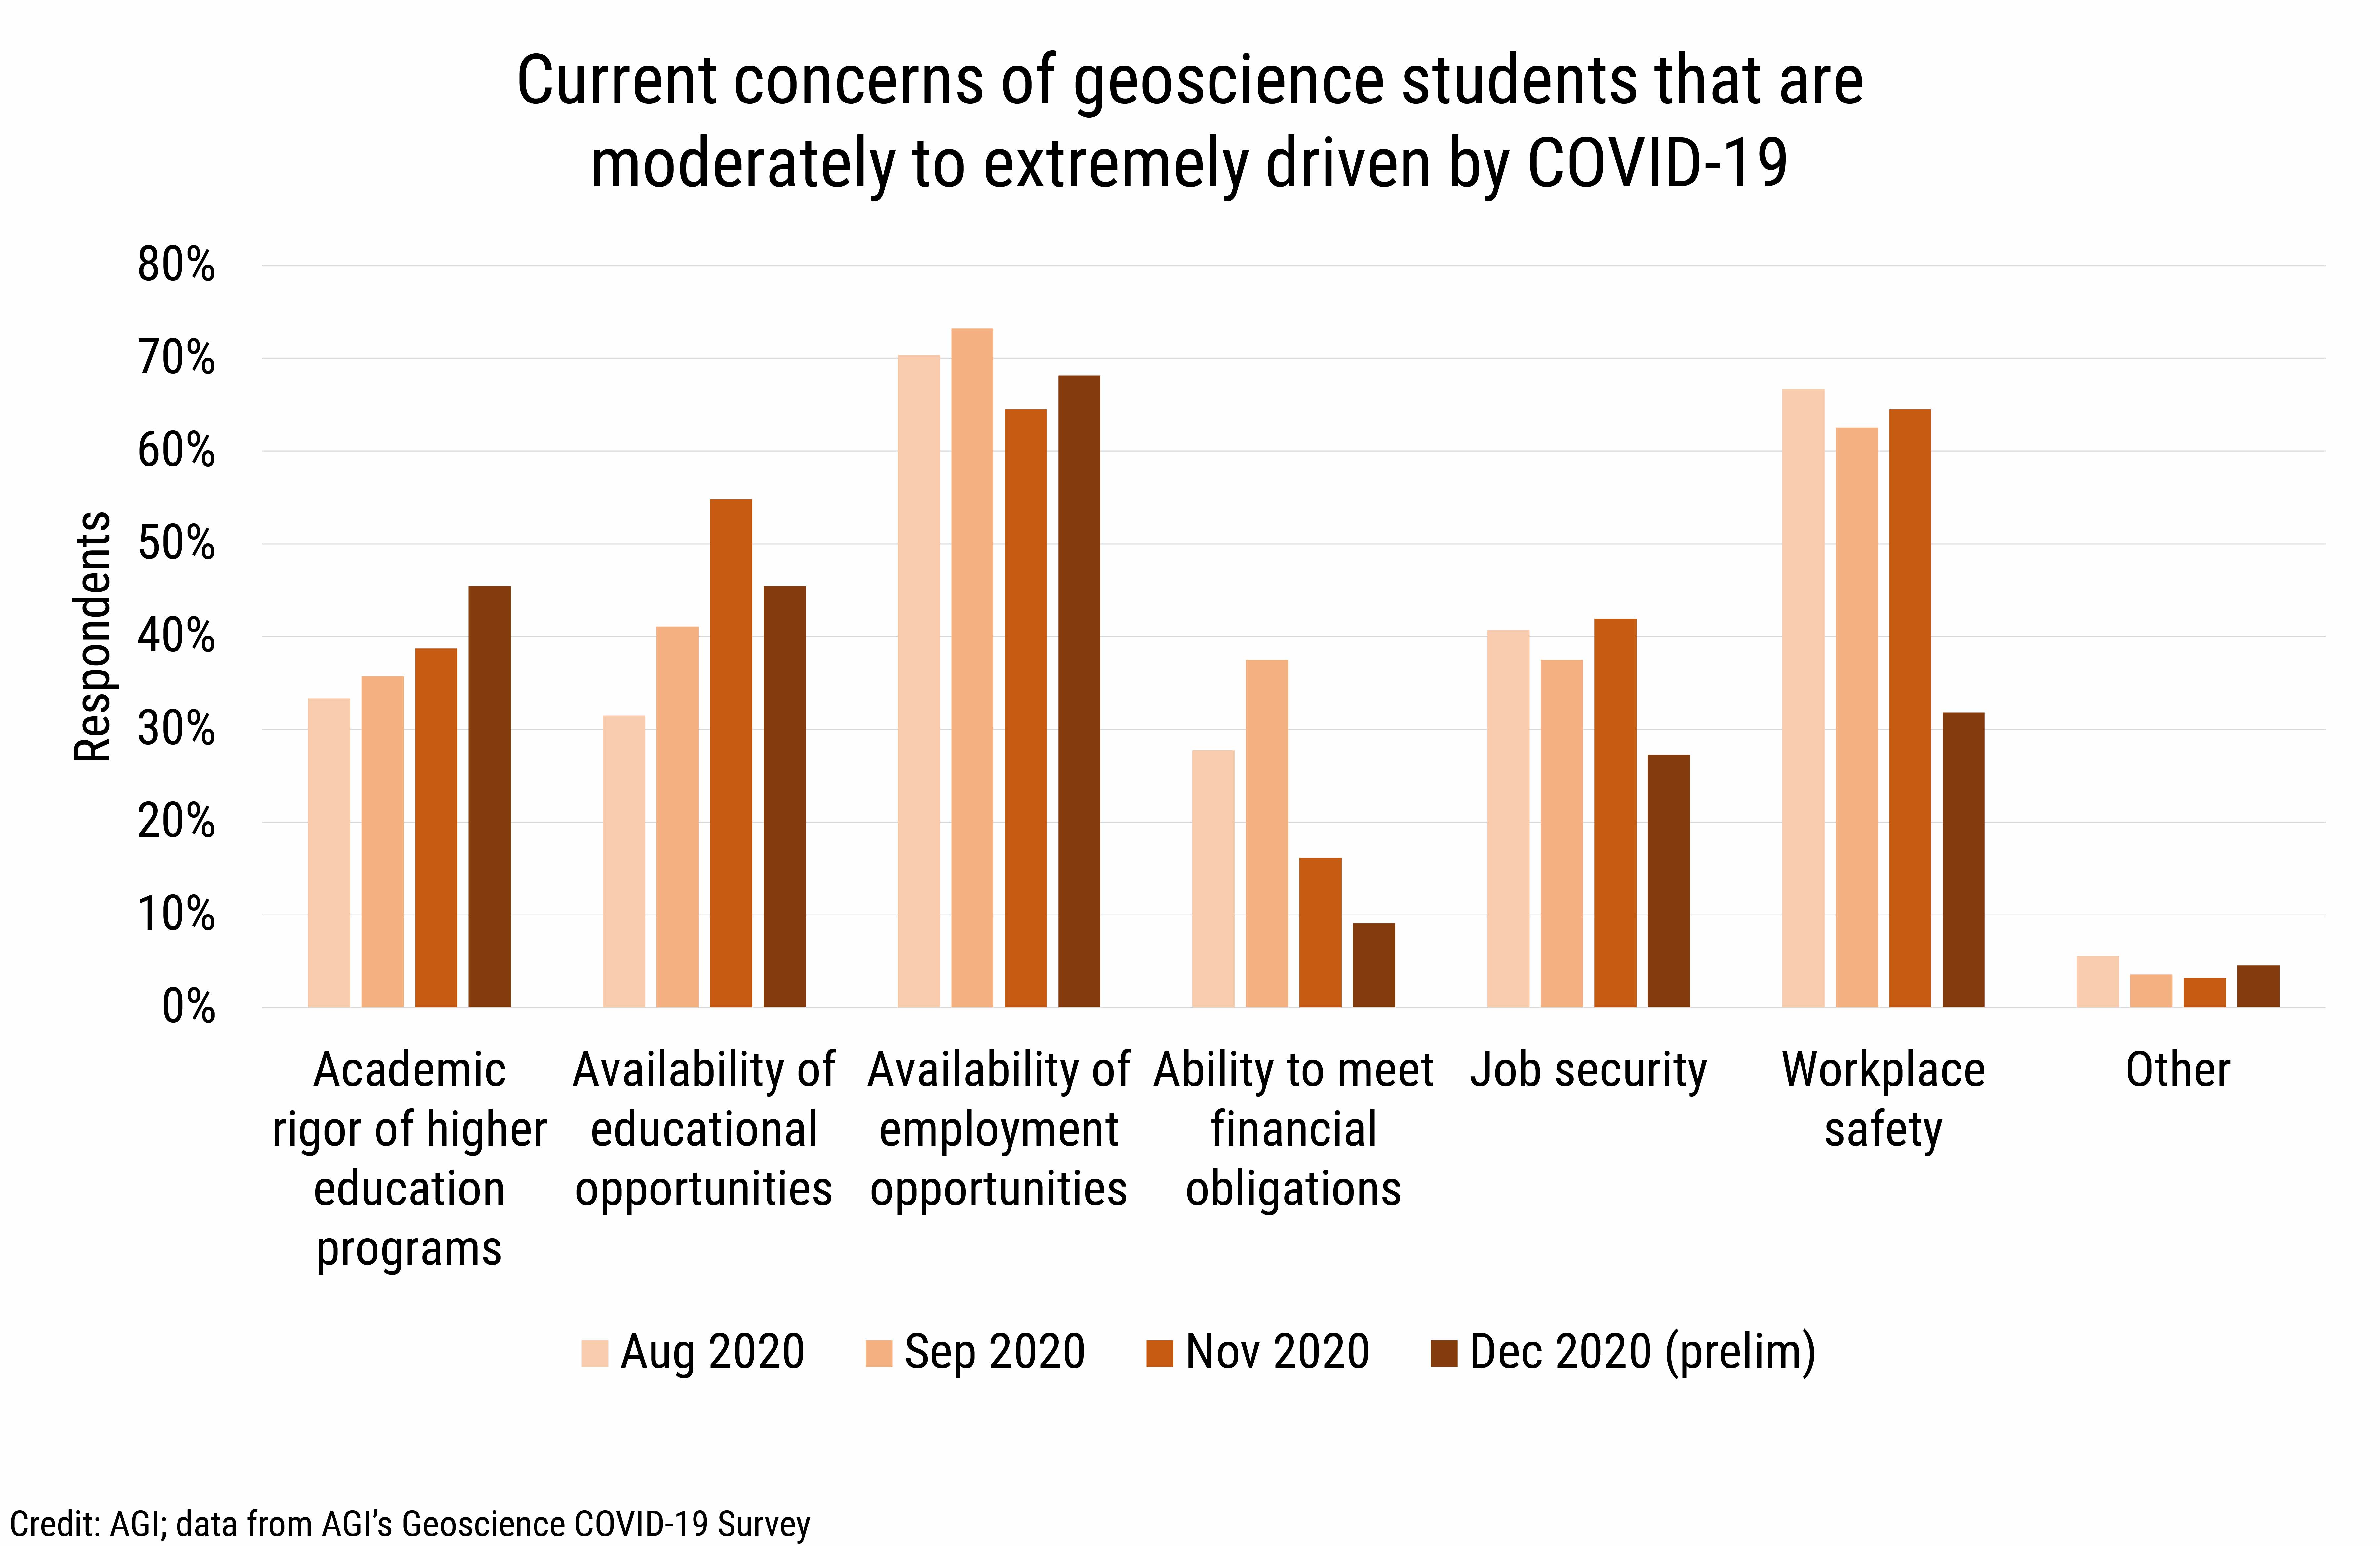 DB_2020-032 chart 07: Current concerns of geoscience students that are moderately to extremely driven by COVID-19 (Credit: AGI; data from AGI's Geoscience COVID-19 Survey)